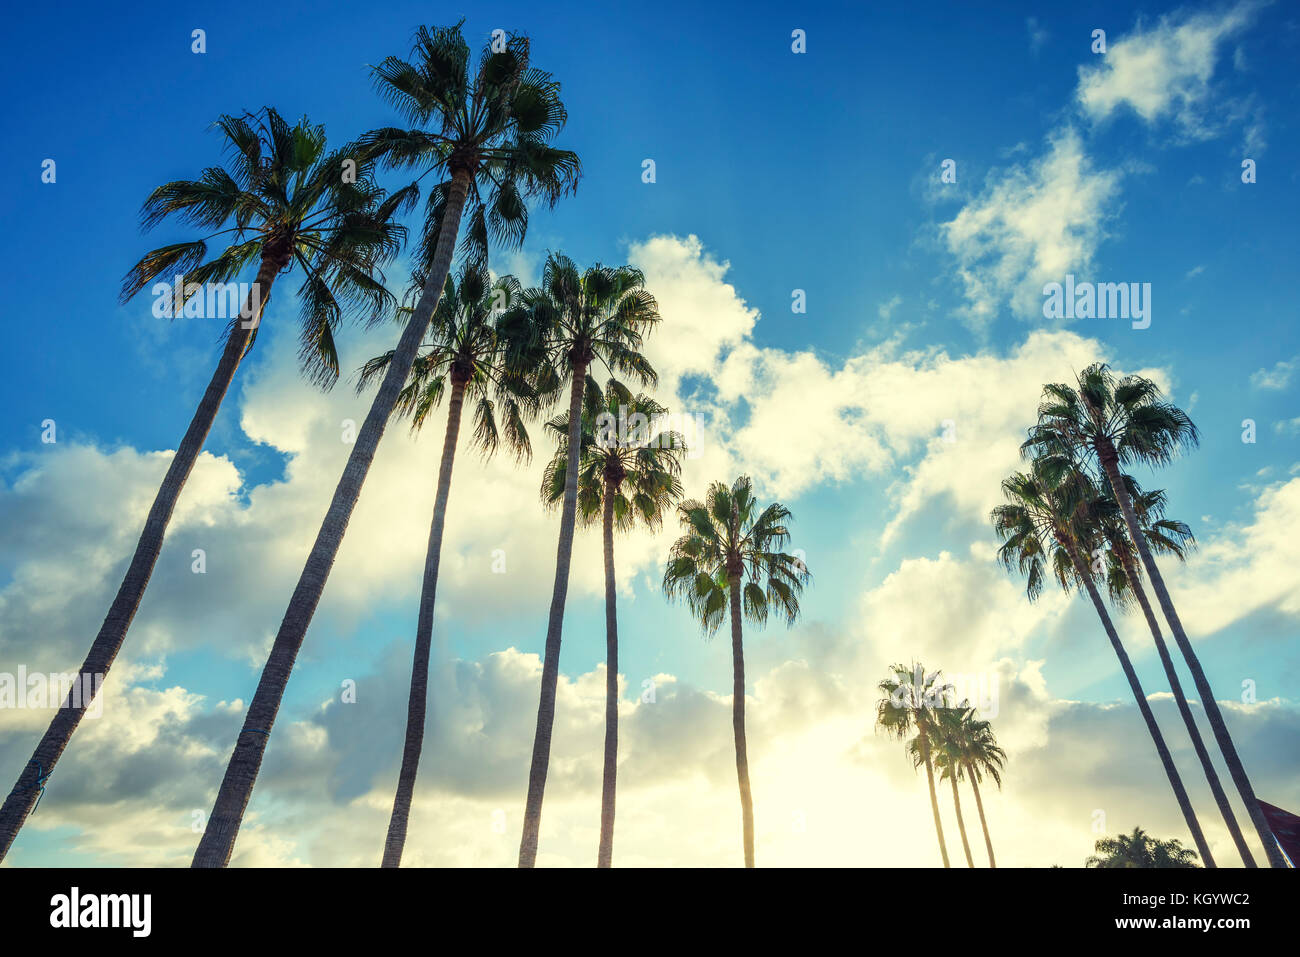 Low angle view of a group of palm trees with cloudy sky. Stock Photo